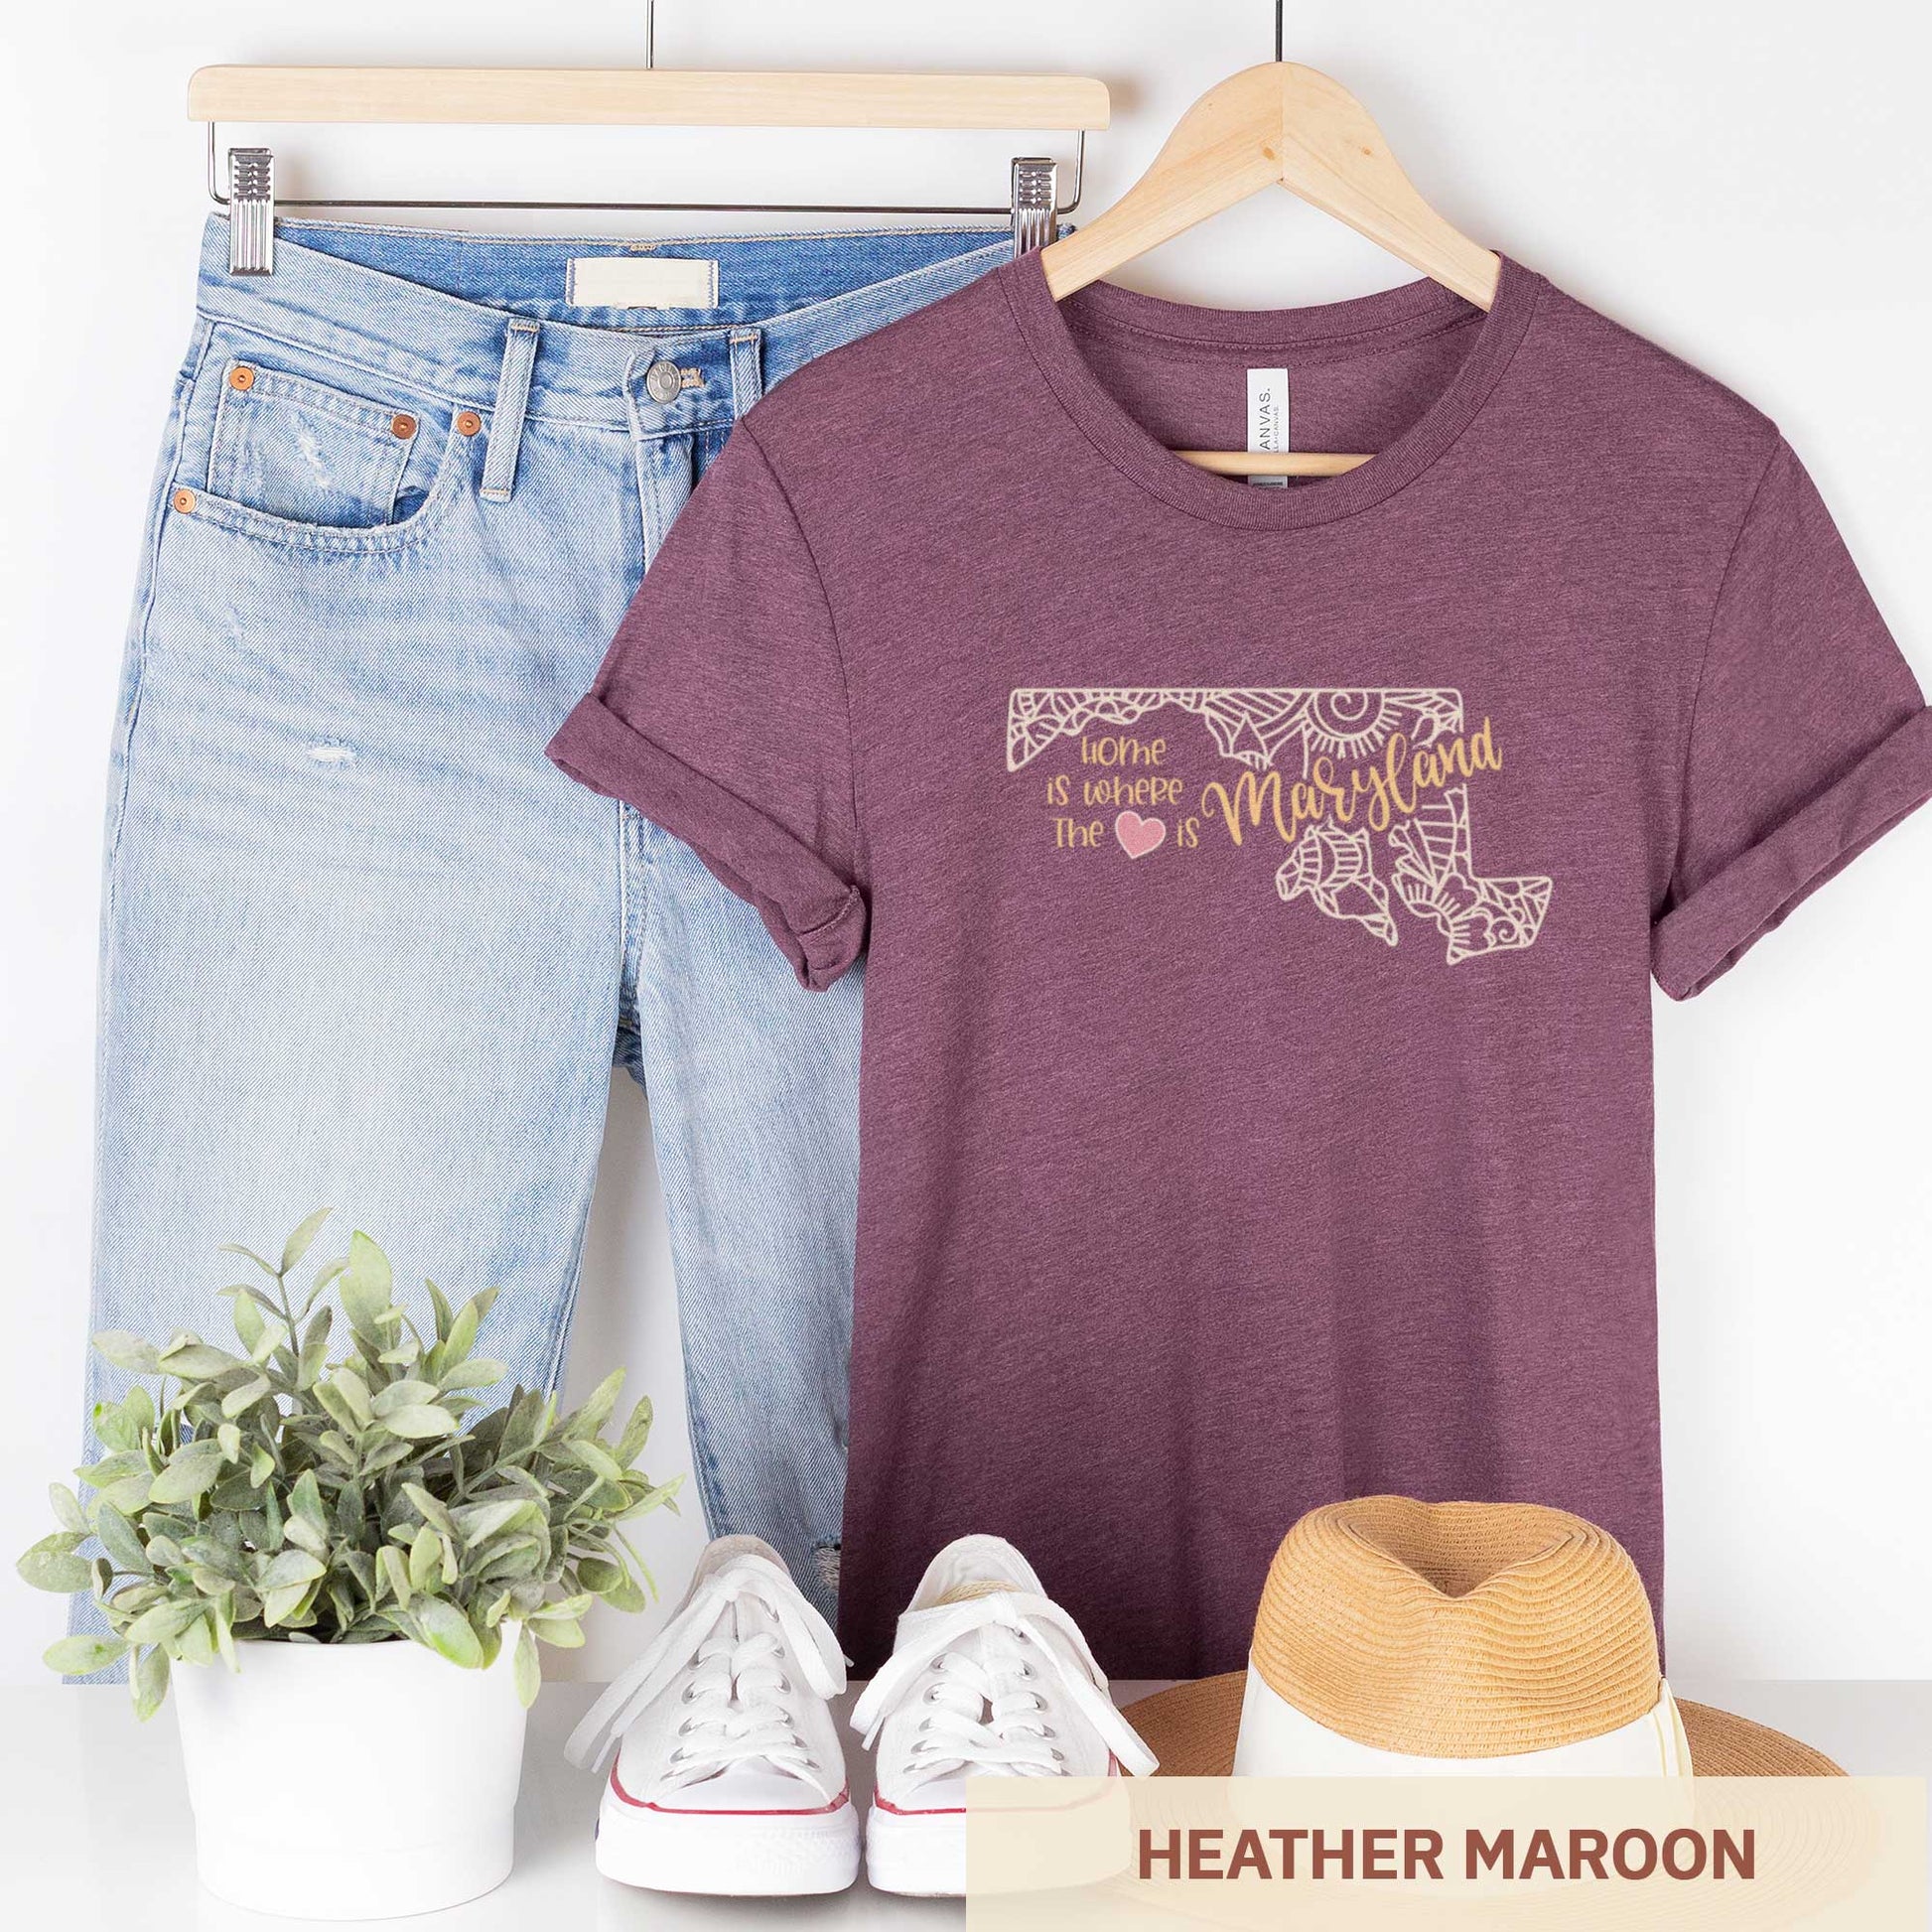 A hanging heather maroon Bella Canvas t-shirt featuring a mandala in the shape of Maryland with the words home is where the heart is.